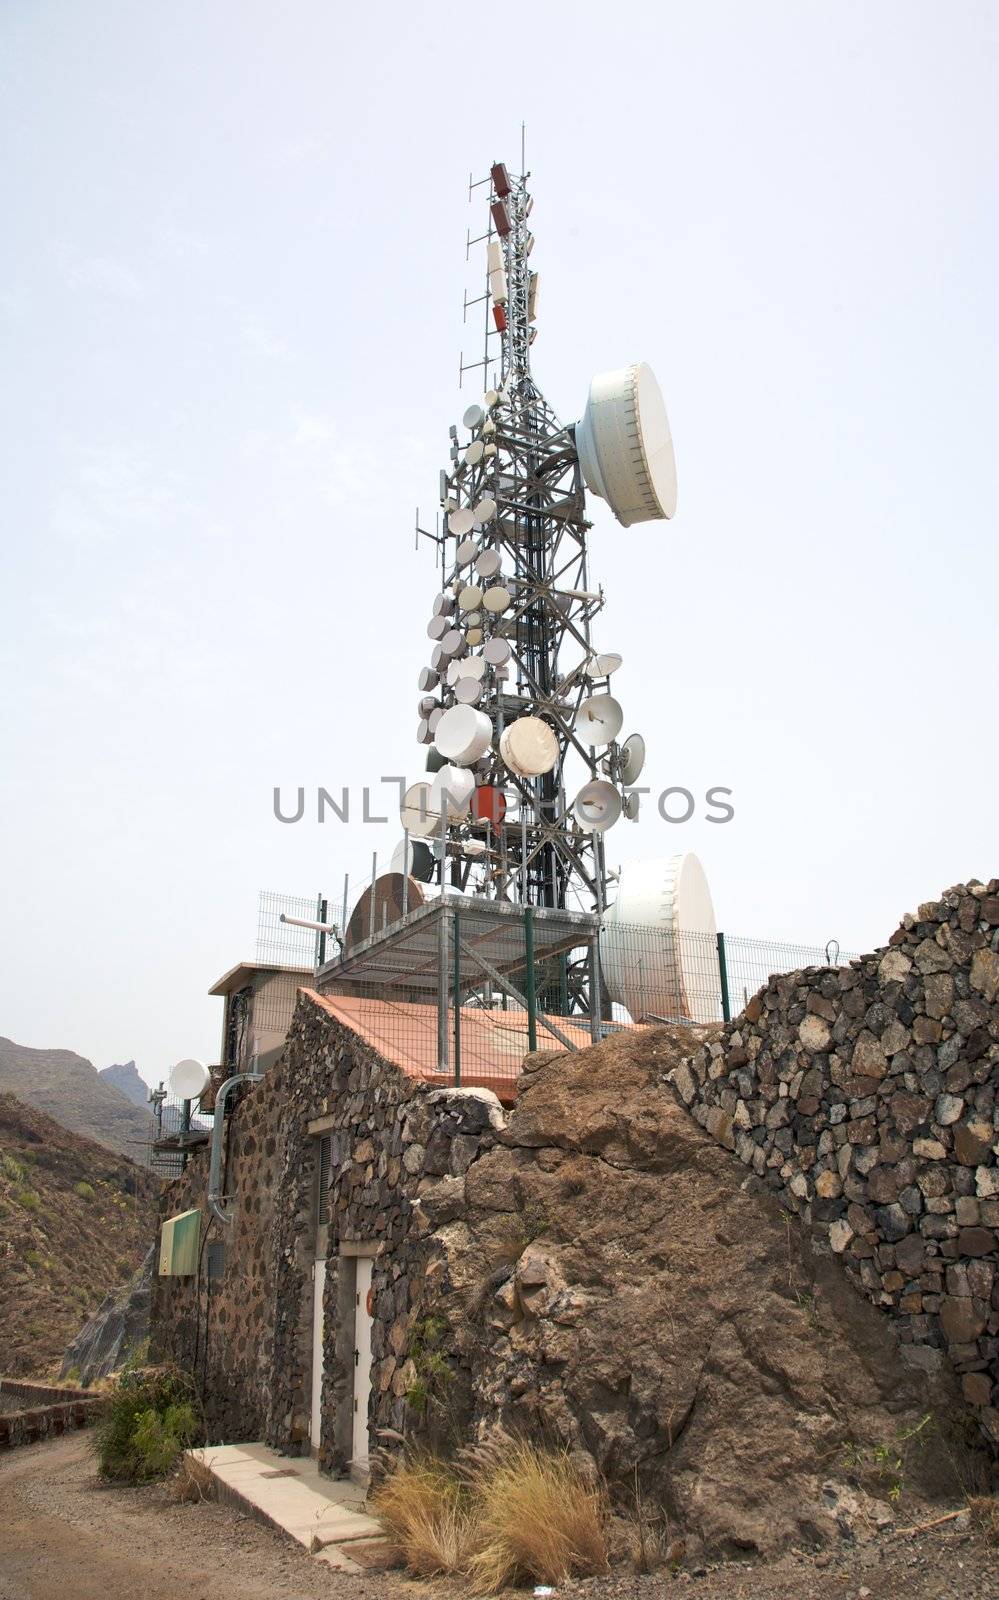 Communications antenna on the roof of a stone house